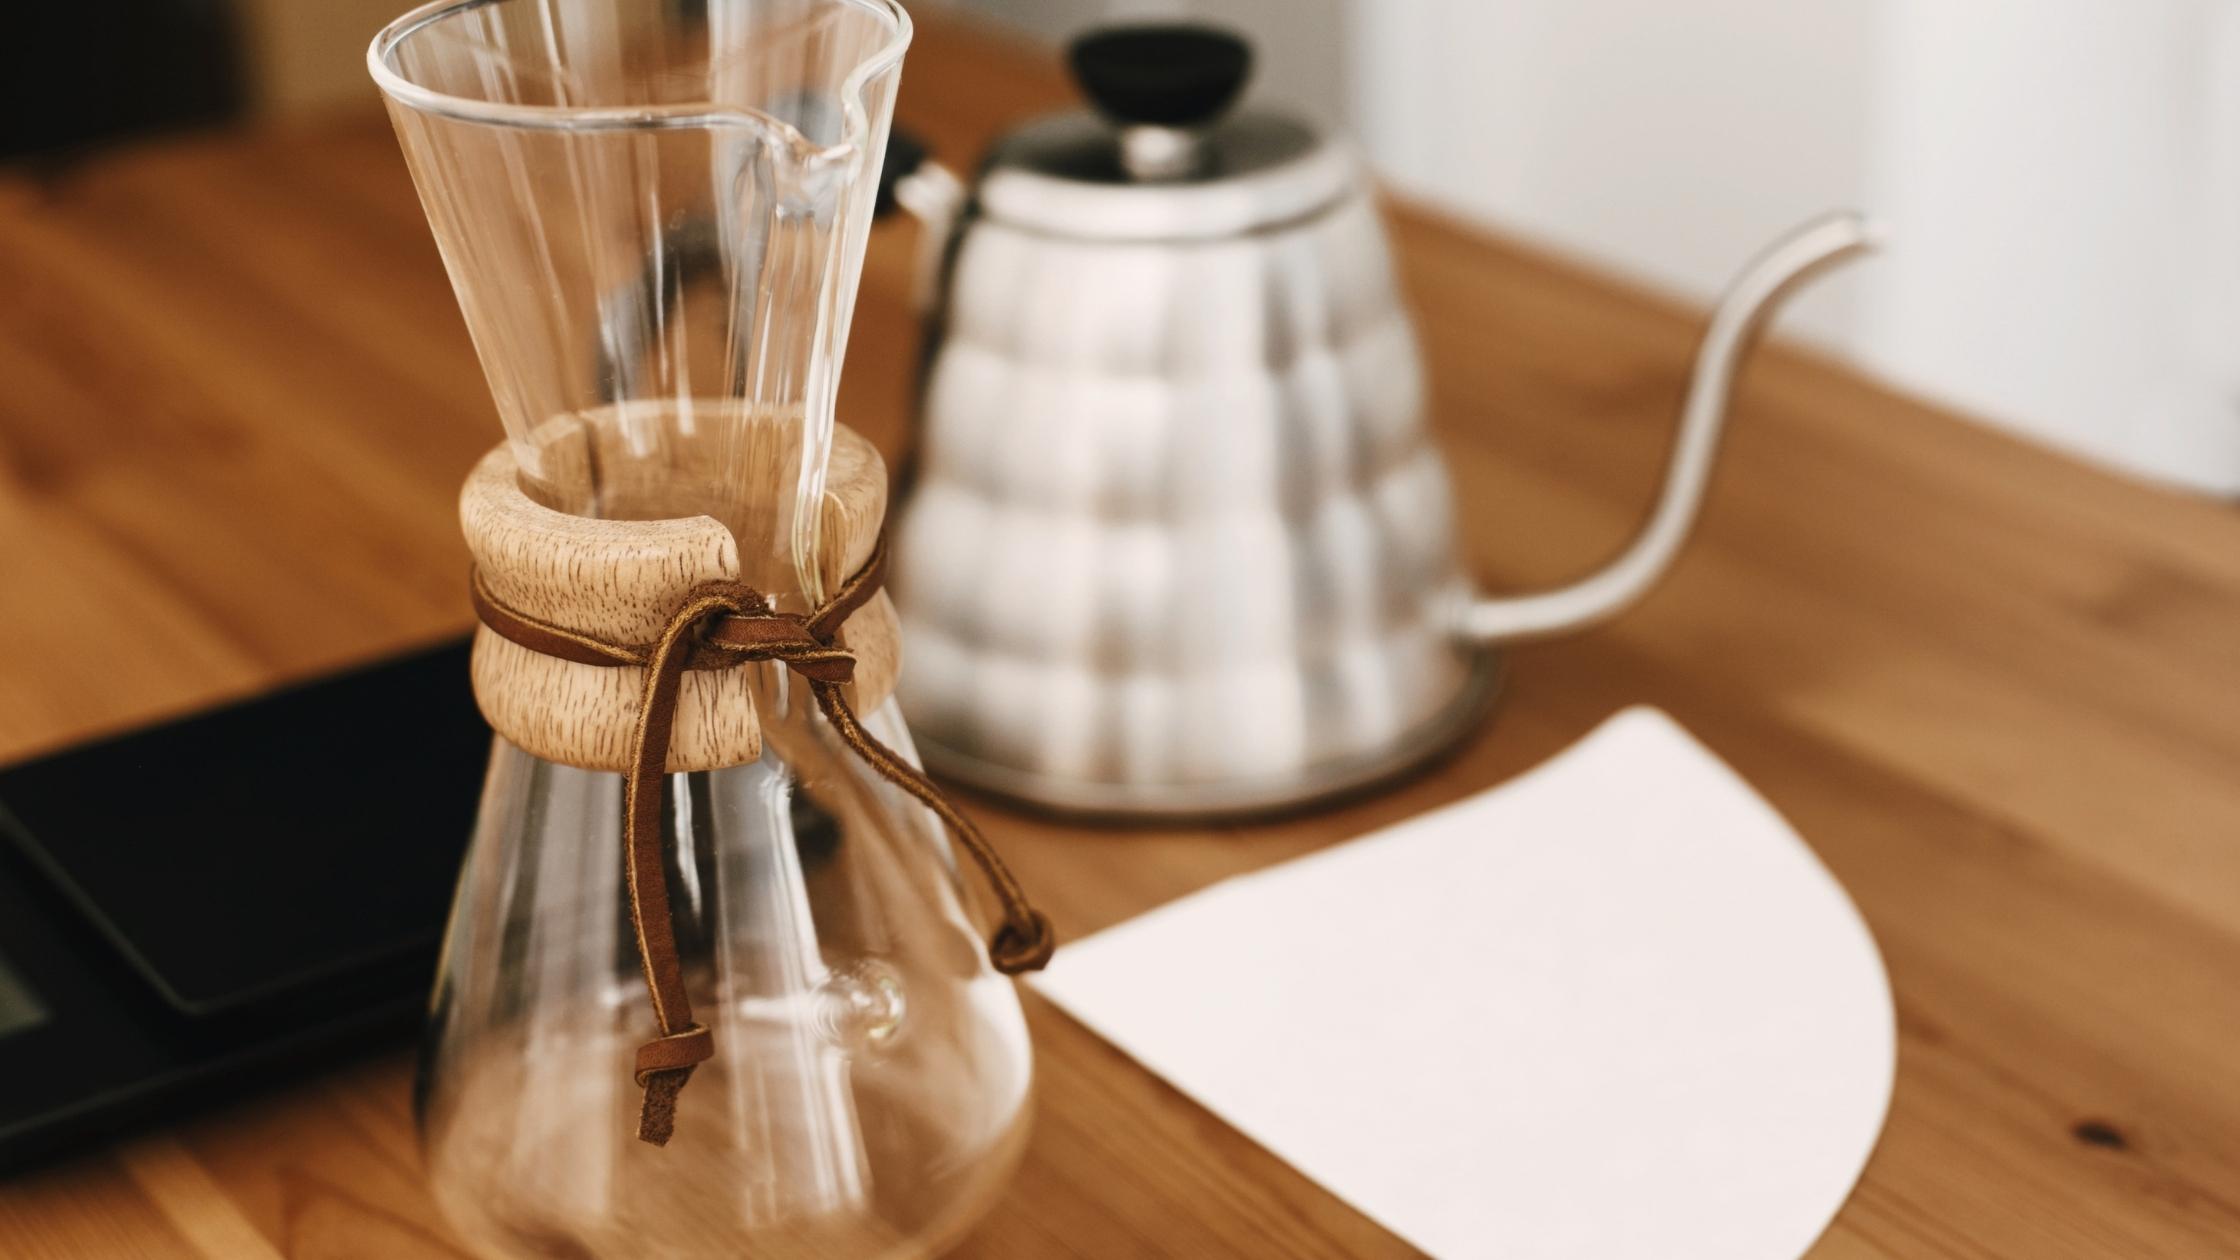 Learn how to brew coffee at home